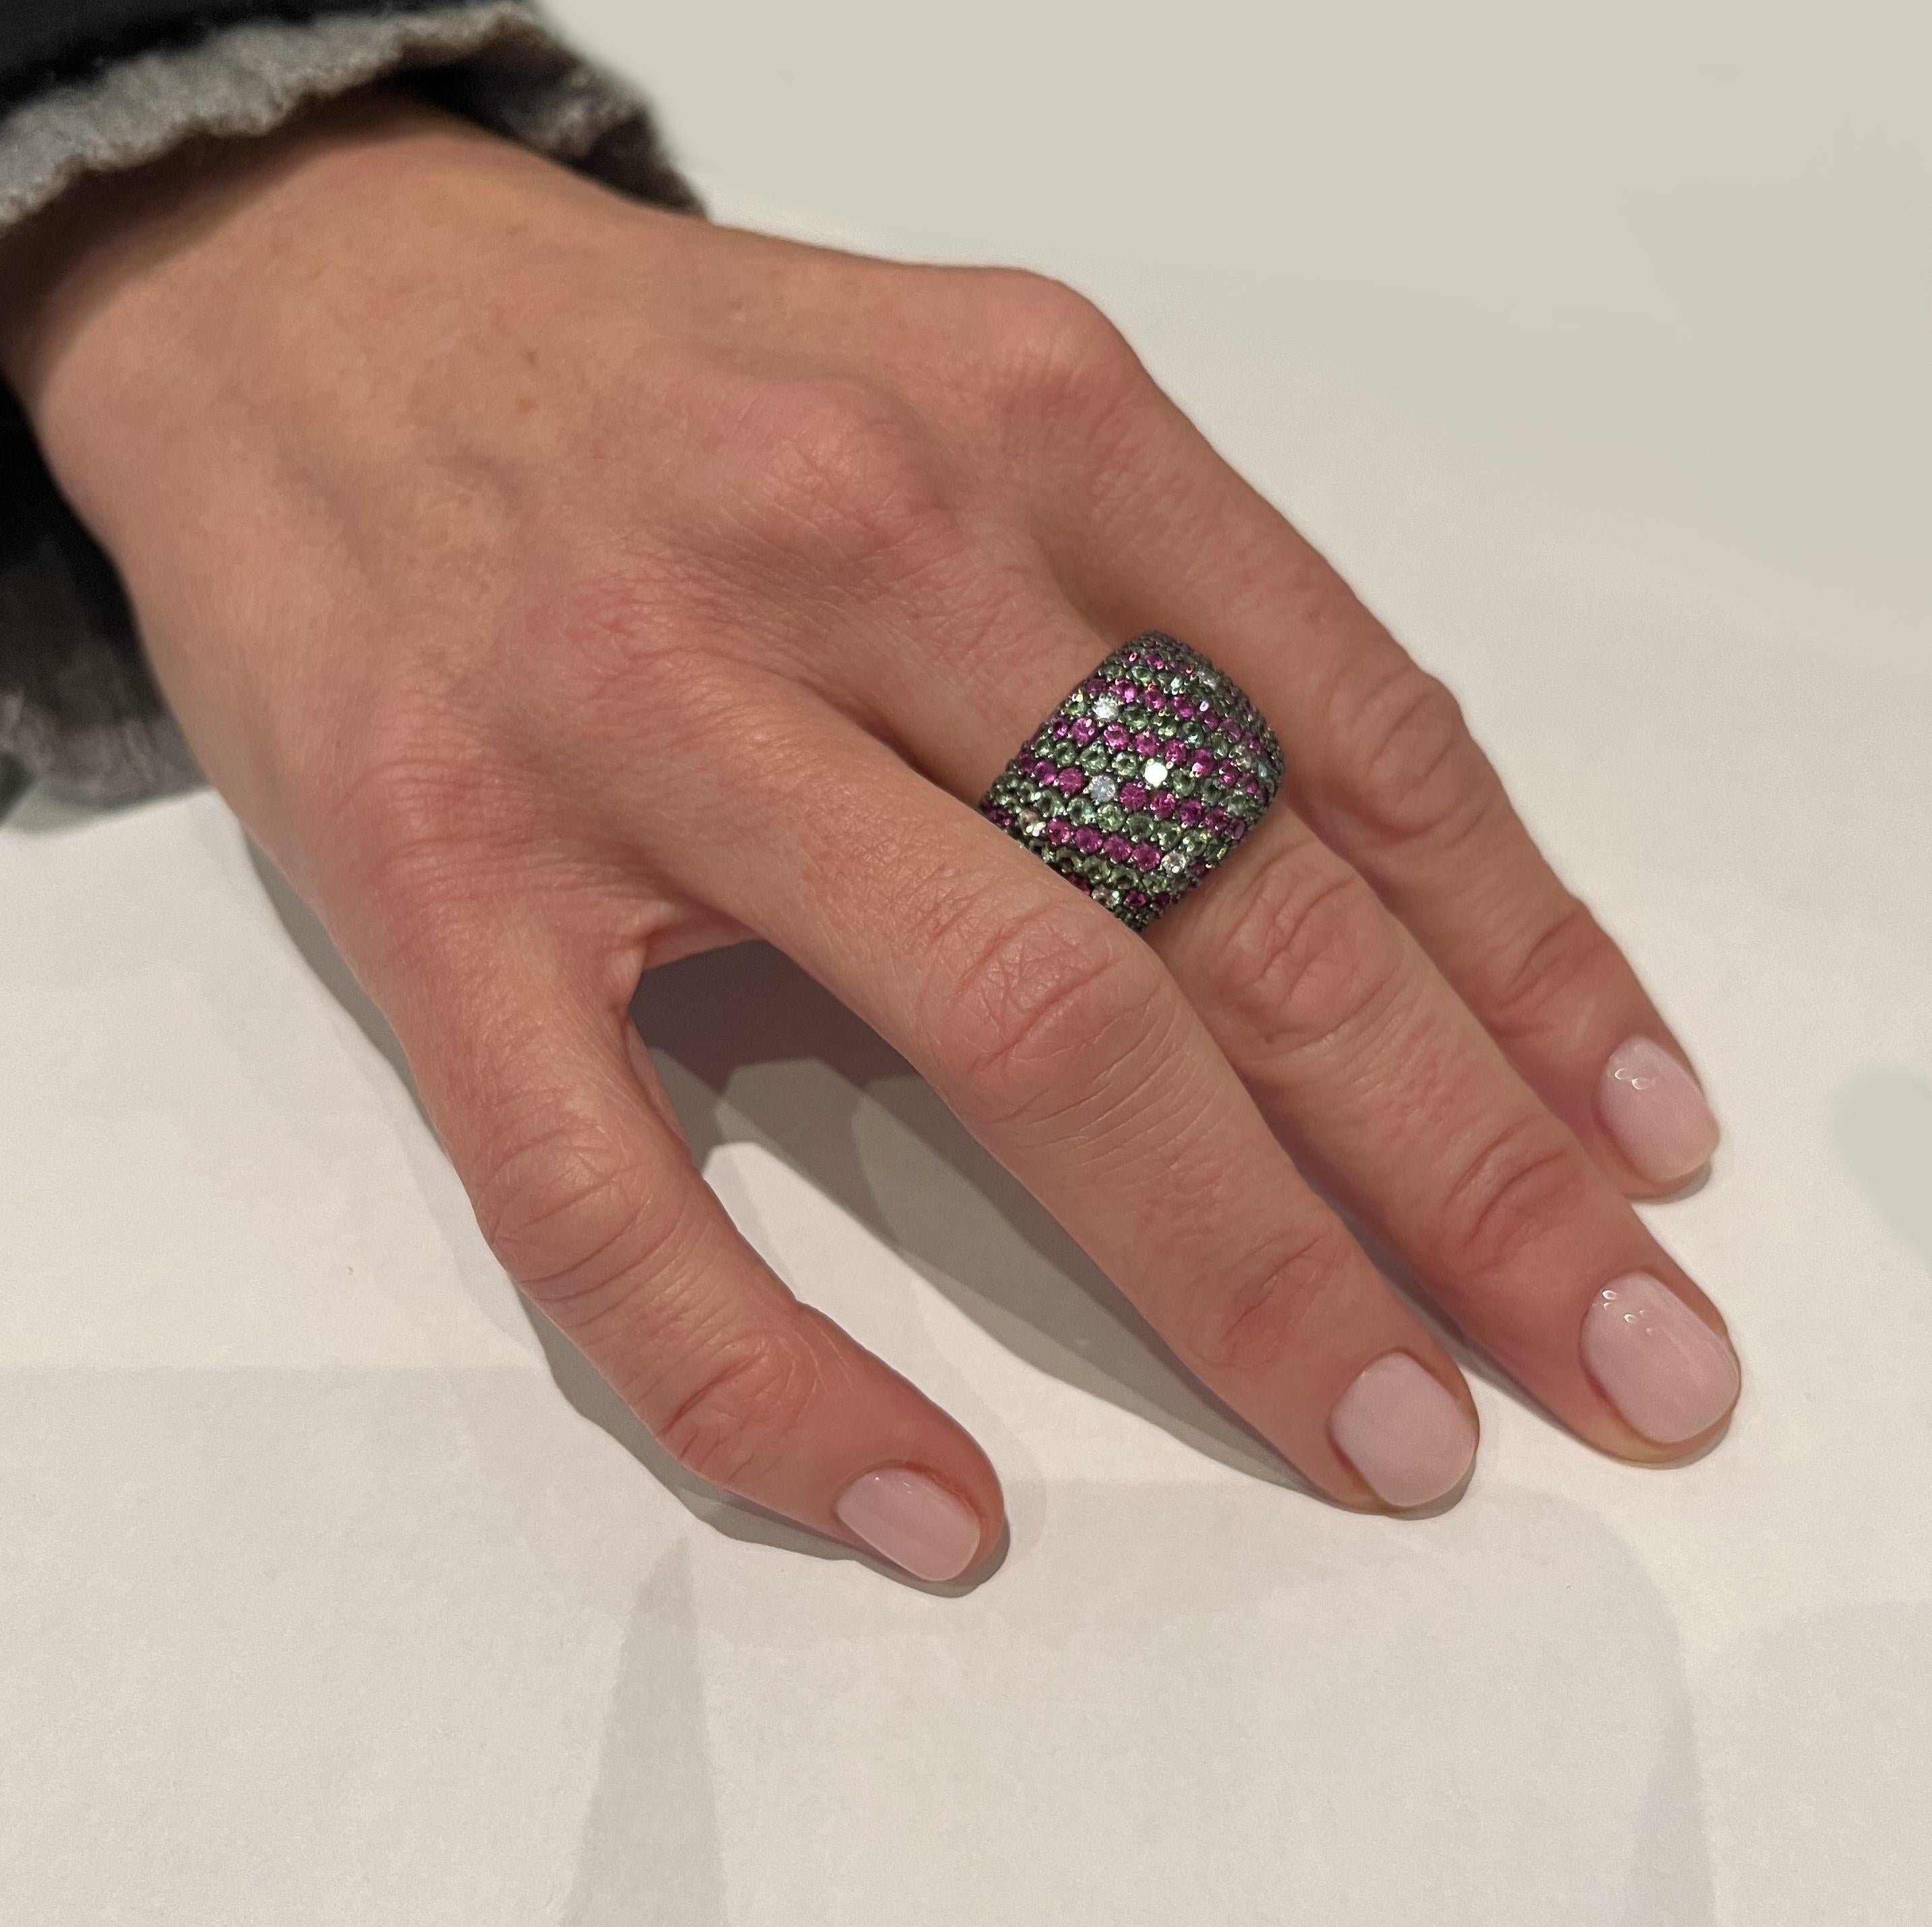 Sapphire Tourmaline Paveè Total 5.36 Carat White Gold Ring by Wagner Preziosen In New Condition For Sale In Berlin, DE